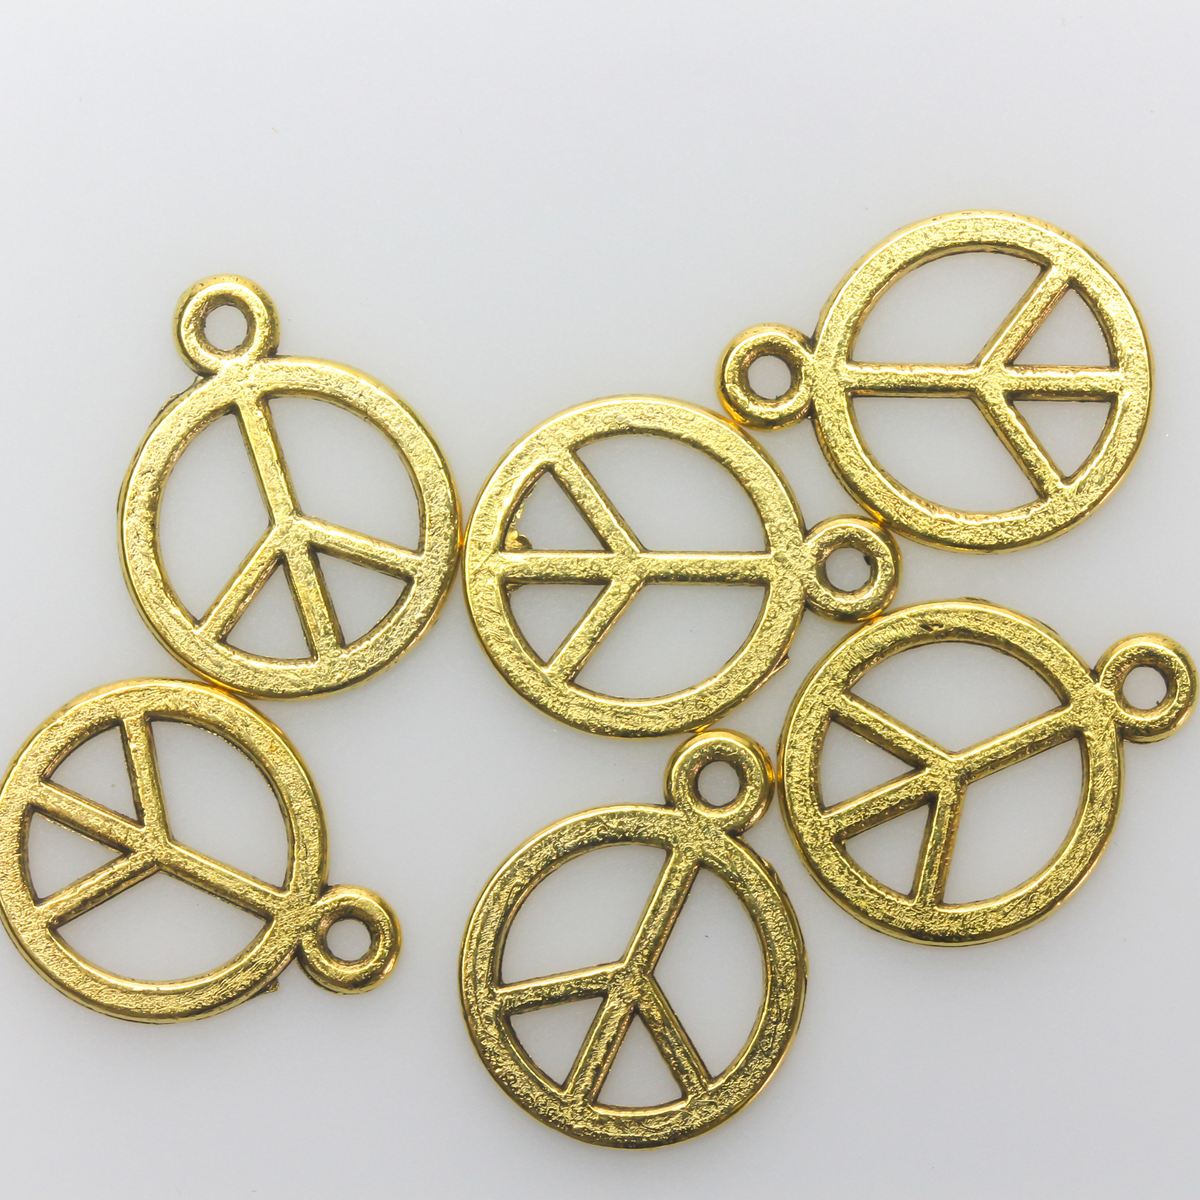 1 Box 200pcs Peace Charms Peace Sign Charm 2 Sizes Stainless Steel Peace Symbol Charms Flat Round Hollow Metal Charms for Jewelry Making Charm DIY